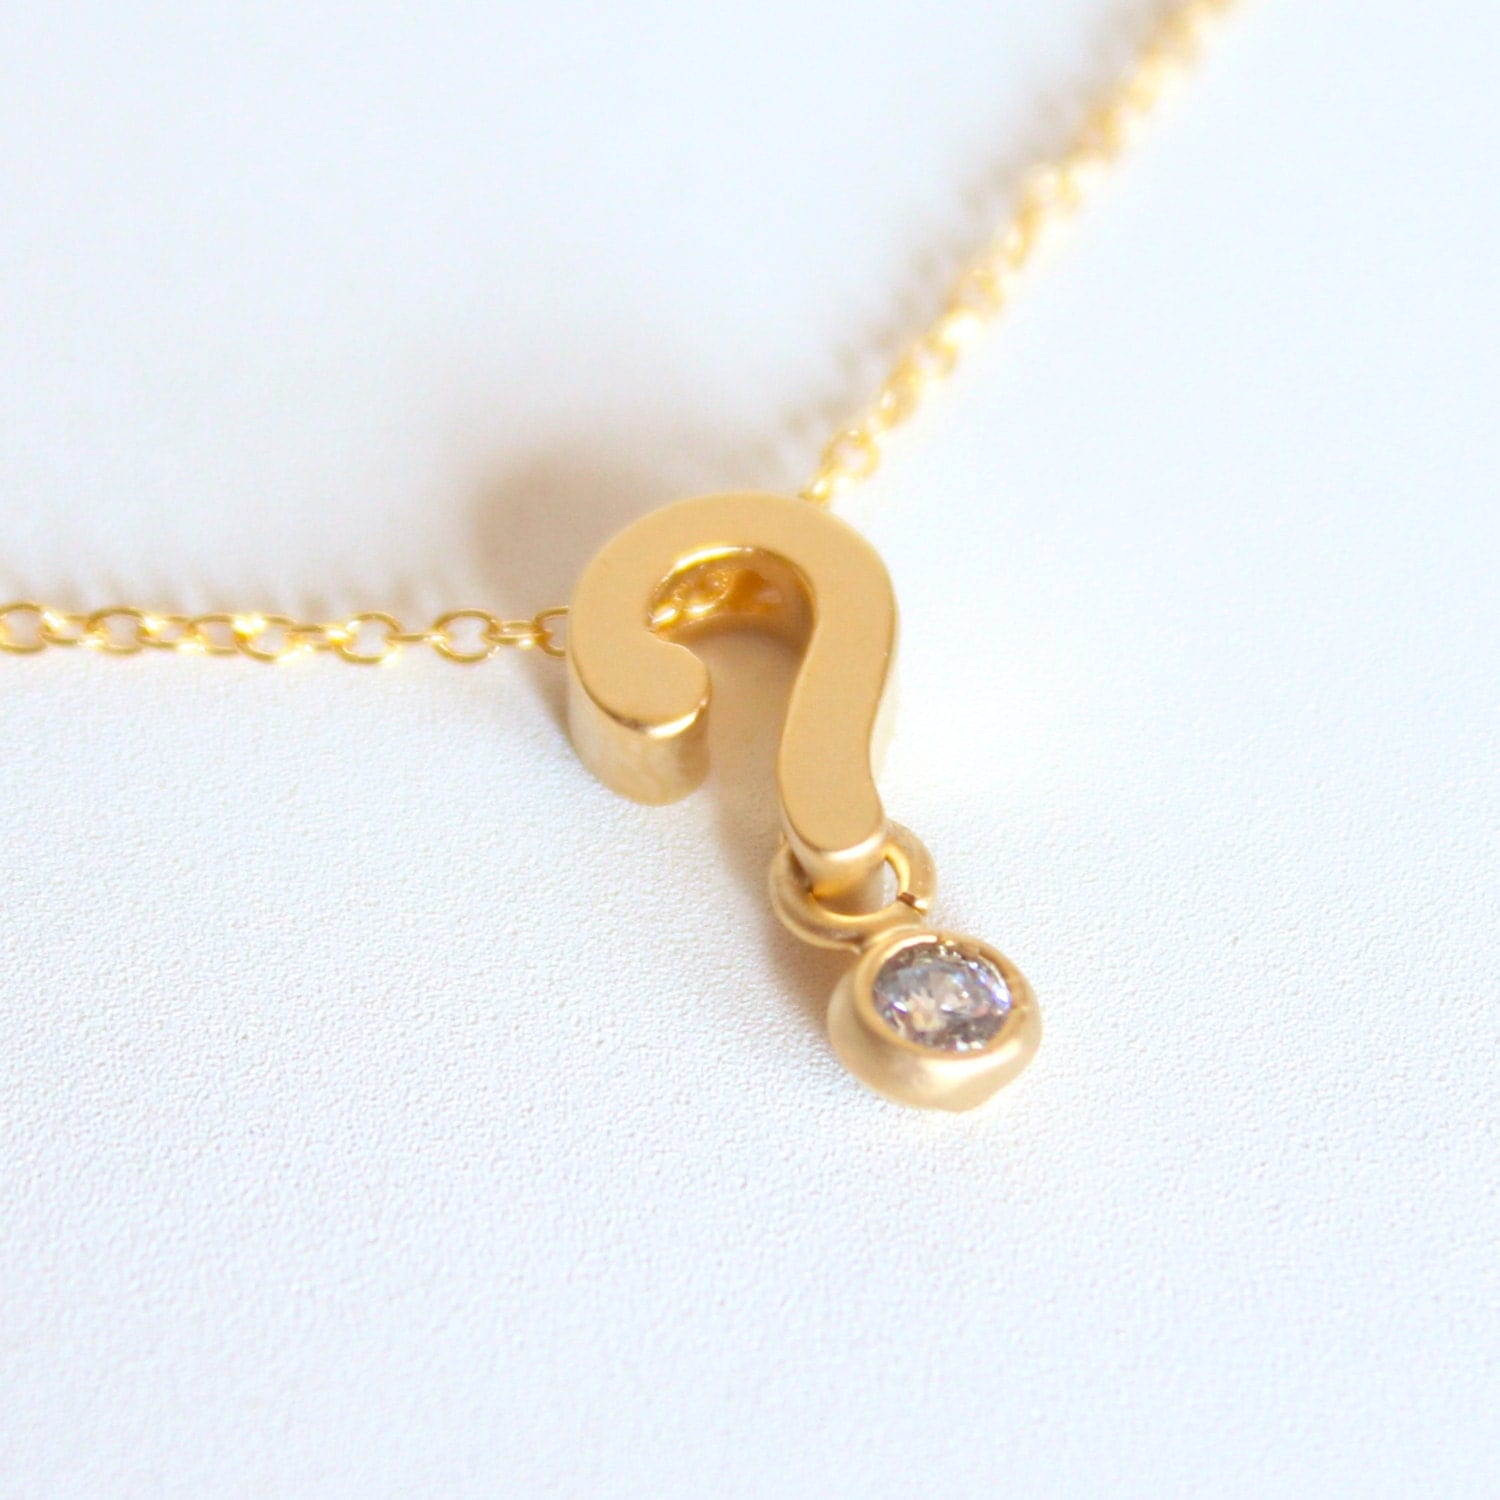 3D Question Mark Necklace 18k Gold and Crystal Charm